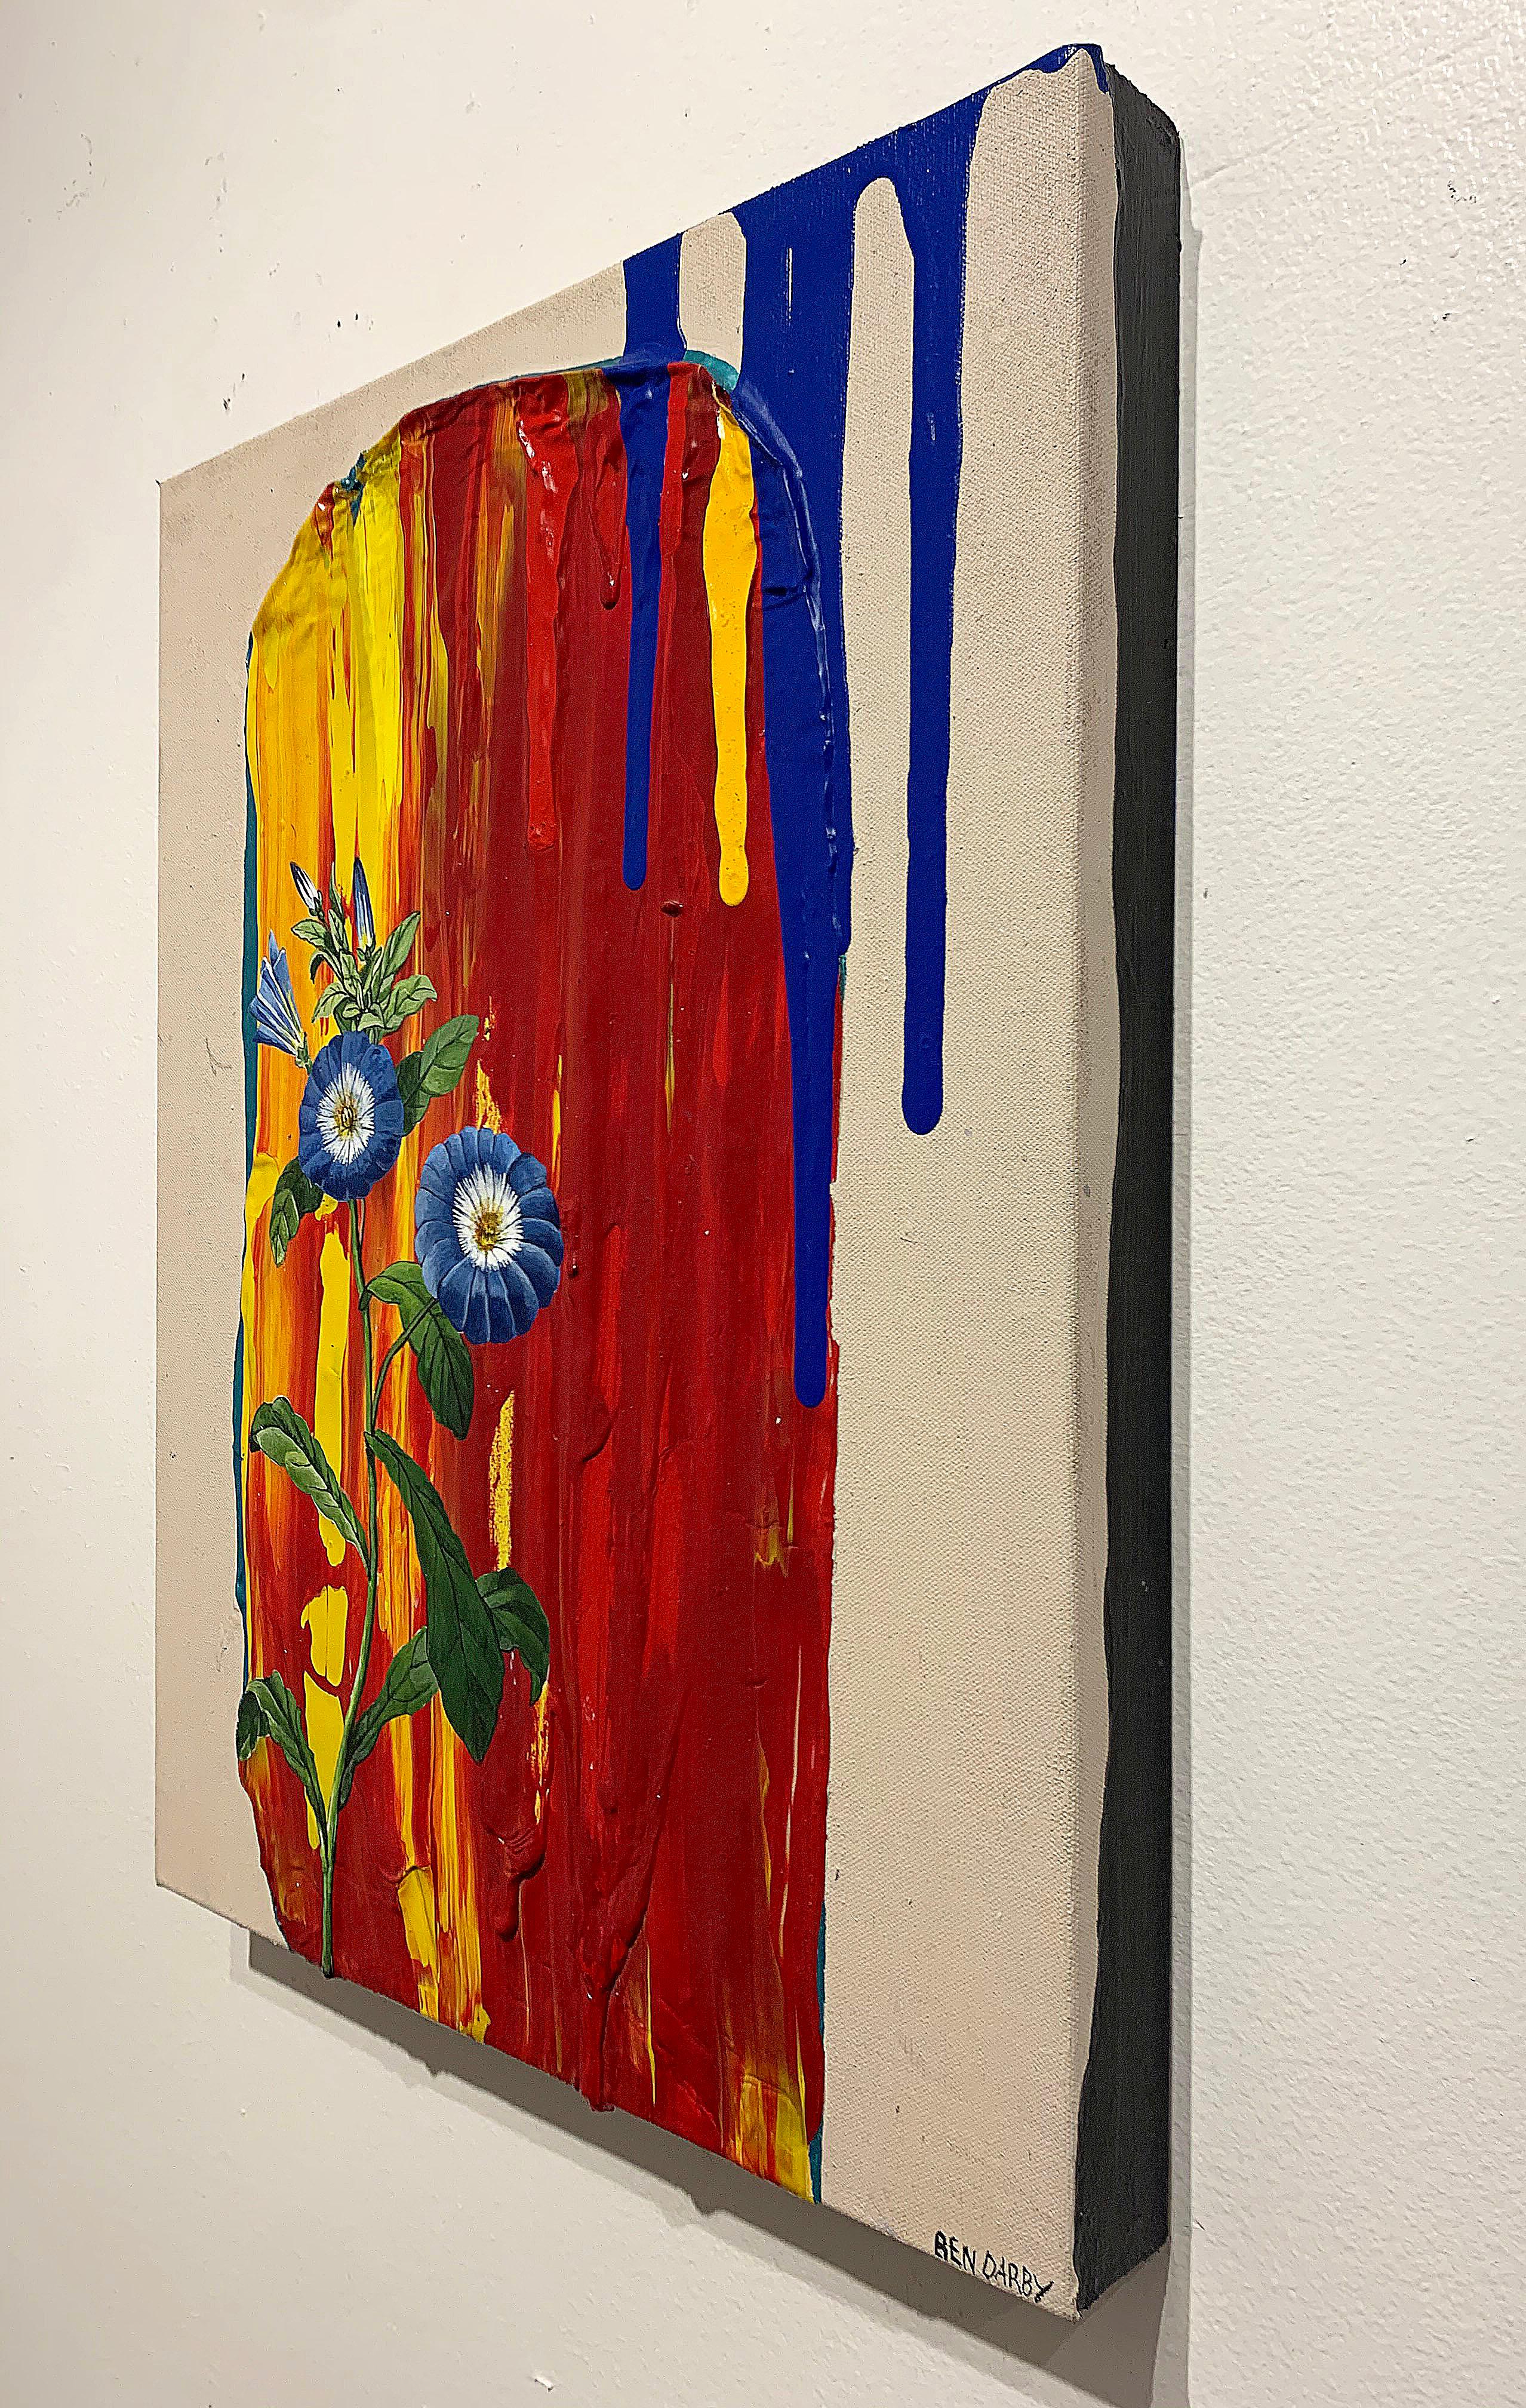 Untitled, acrylic on canvas, blue flowers, texture, red, blue, yellow - Contemporary Painting by Ben Darby